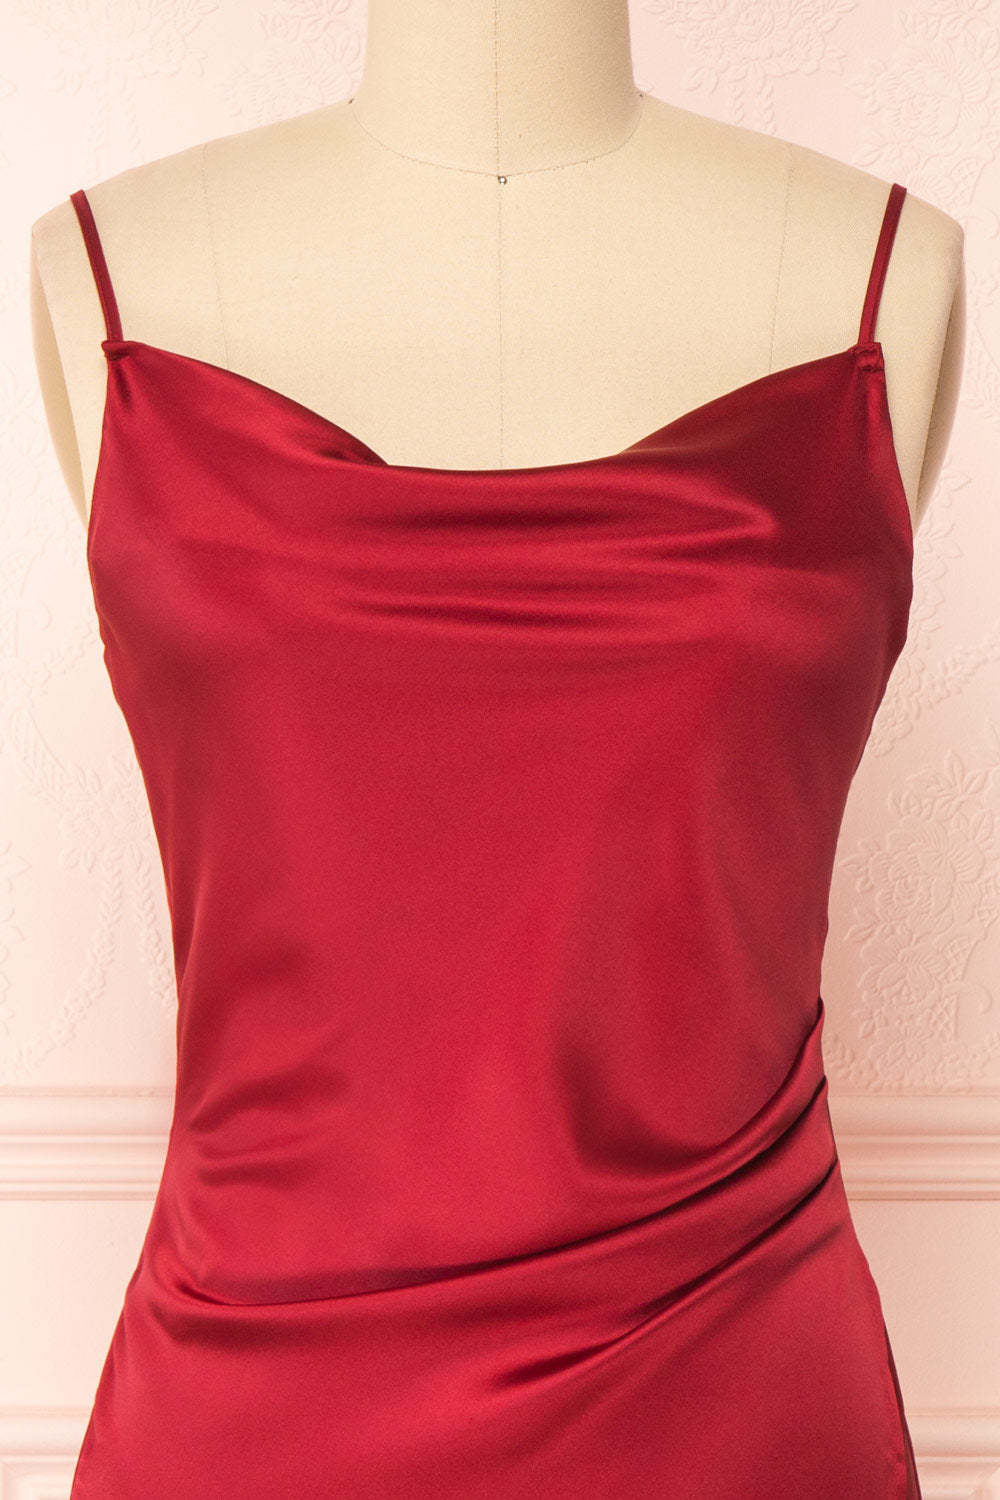 Chloe Wine Red Silky Midi Slip Dress | Boutique 1861 front close-up